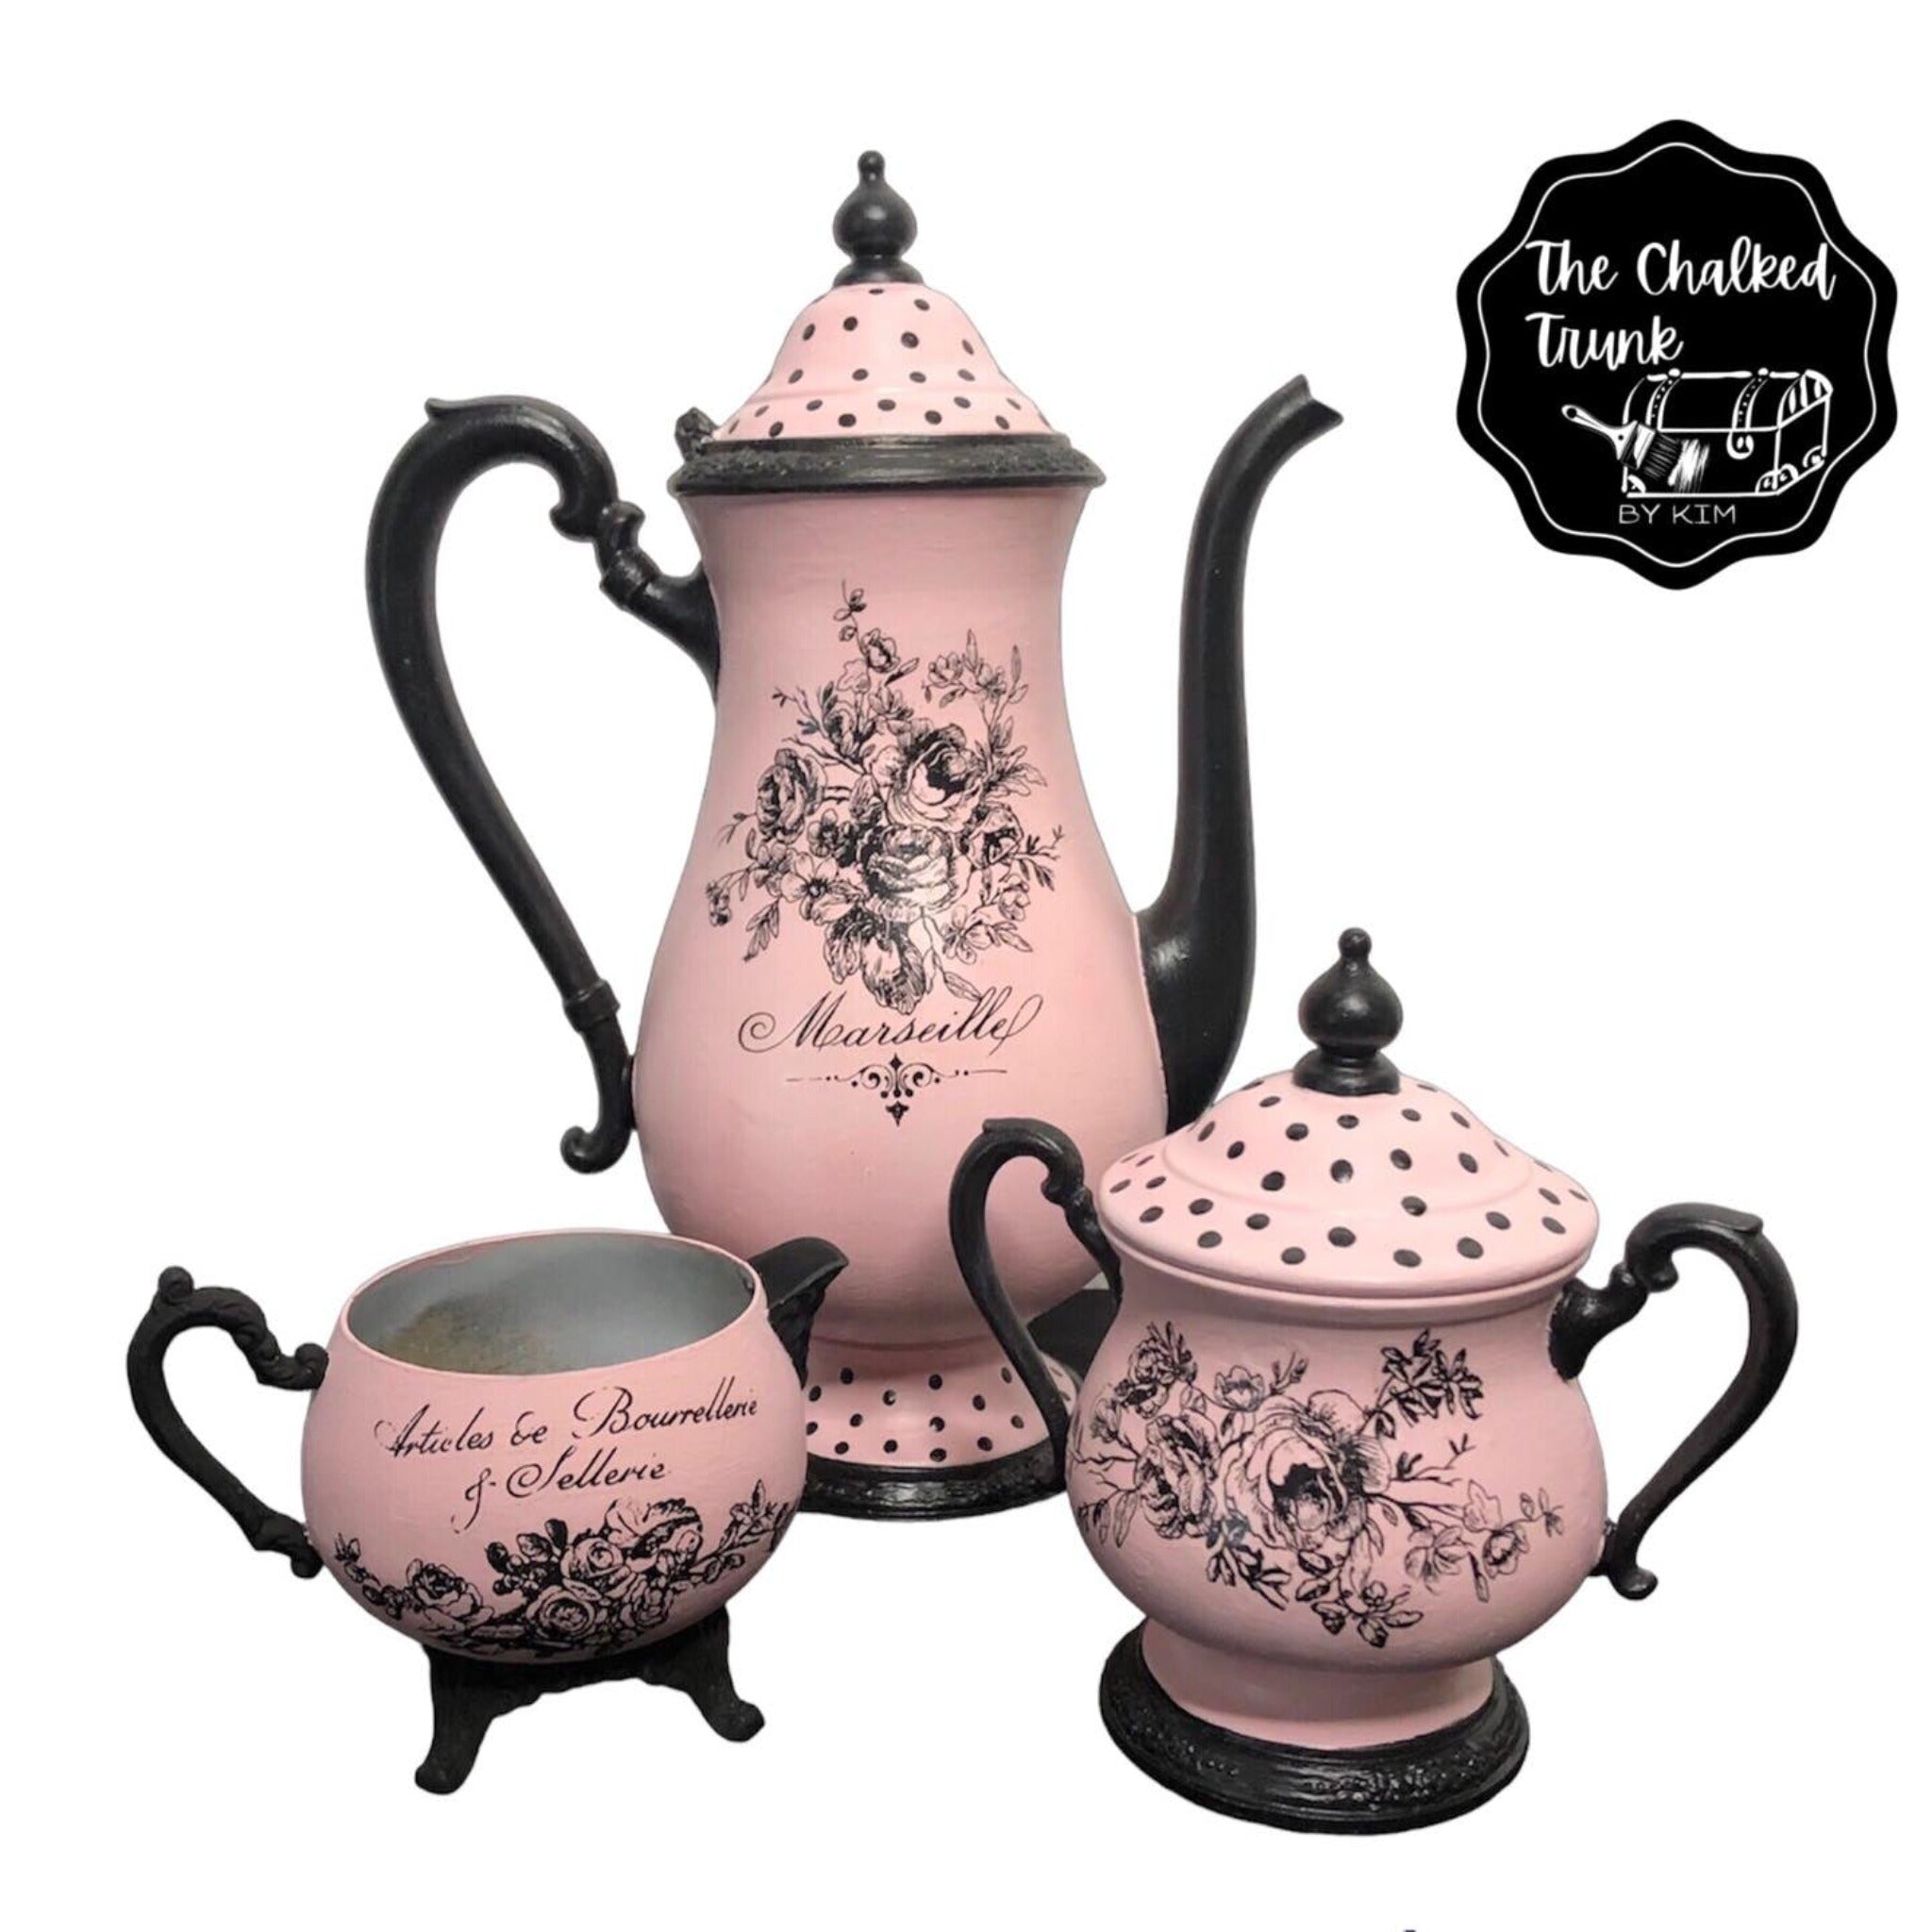 A vintage tea set refurbished by The Chalked Trunk by Kim are painted pale pink and black and features ReDesign with Prima's Classic Vintage Labels transfers on them.